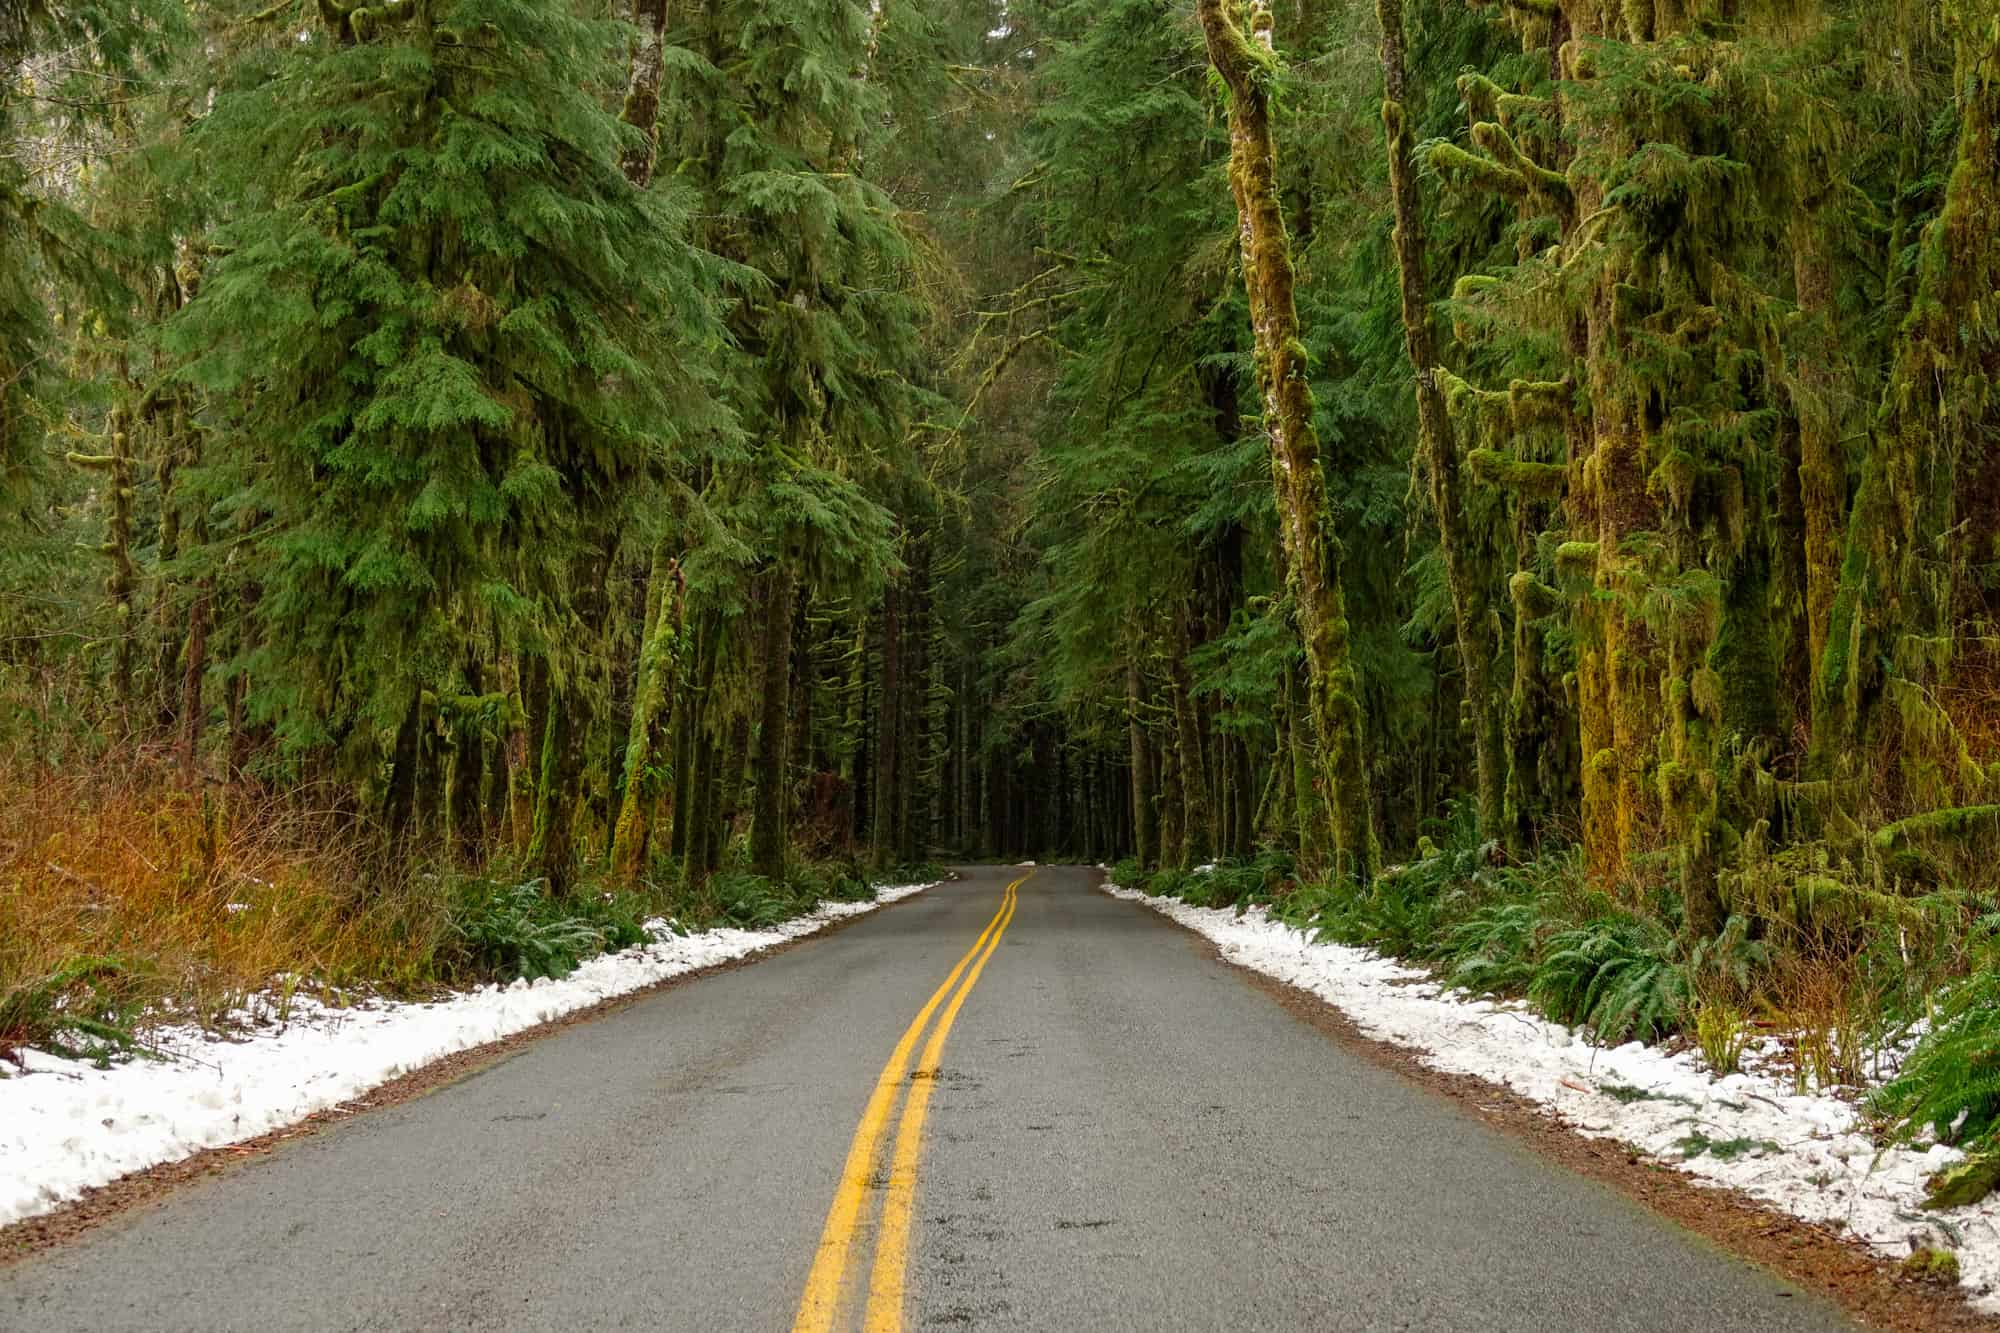 heading into hoh rainforest, there is a bit of snow on either side of the road along with tall green trees
